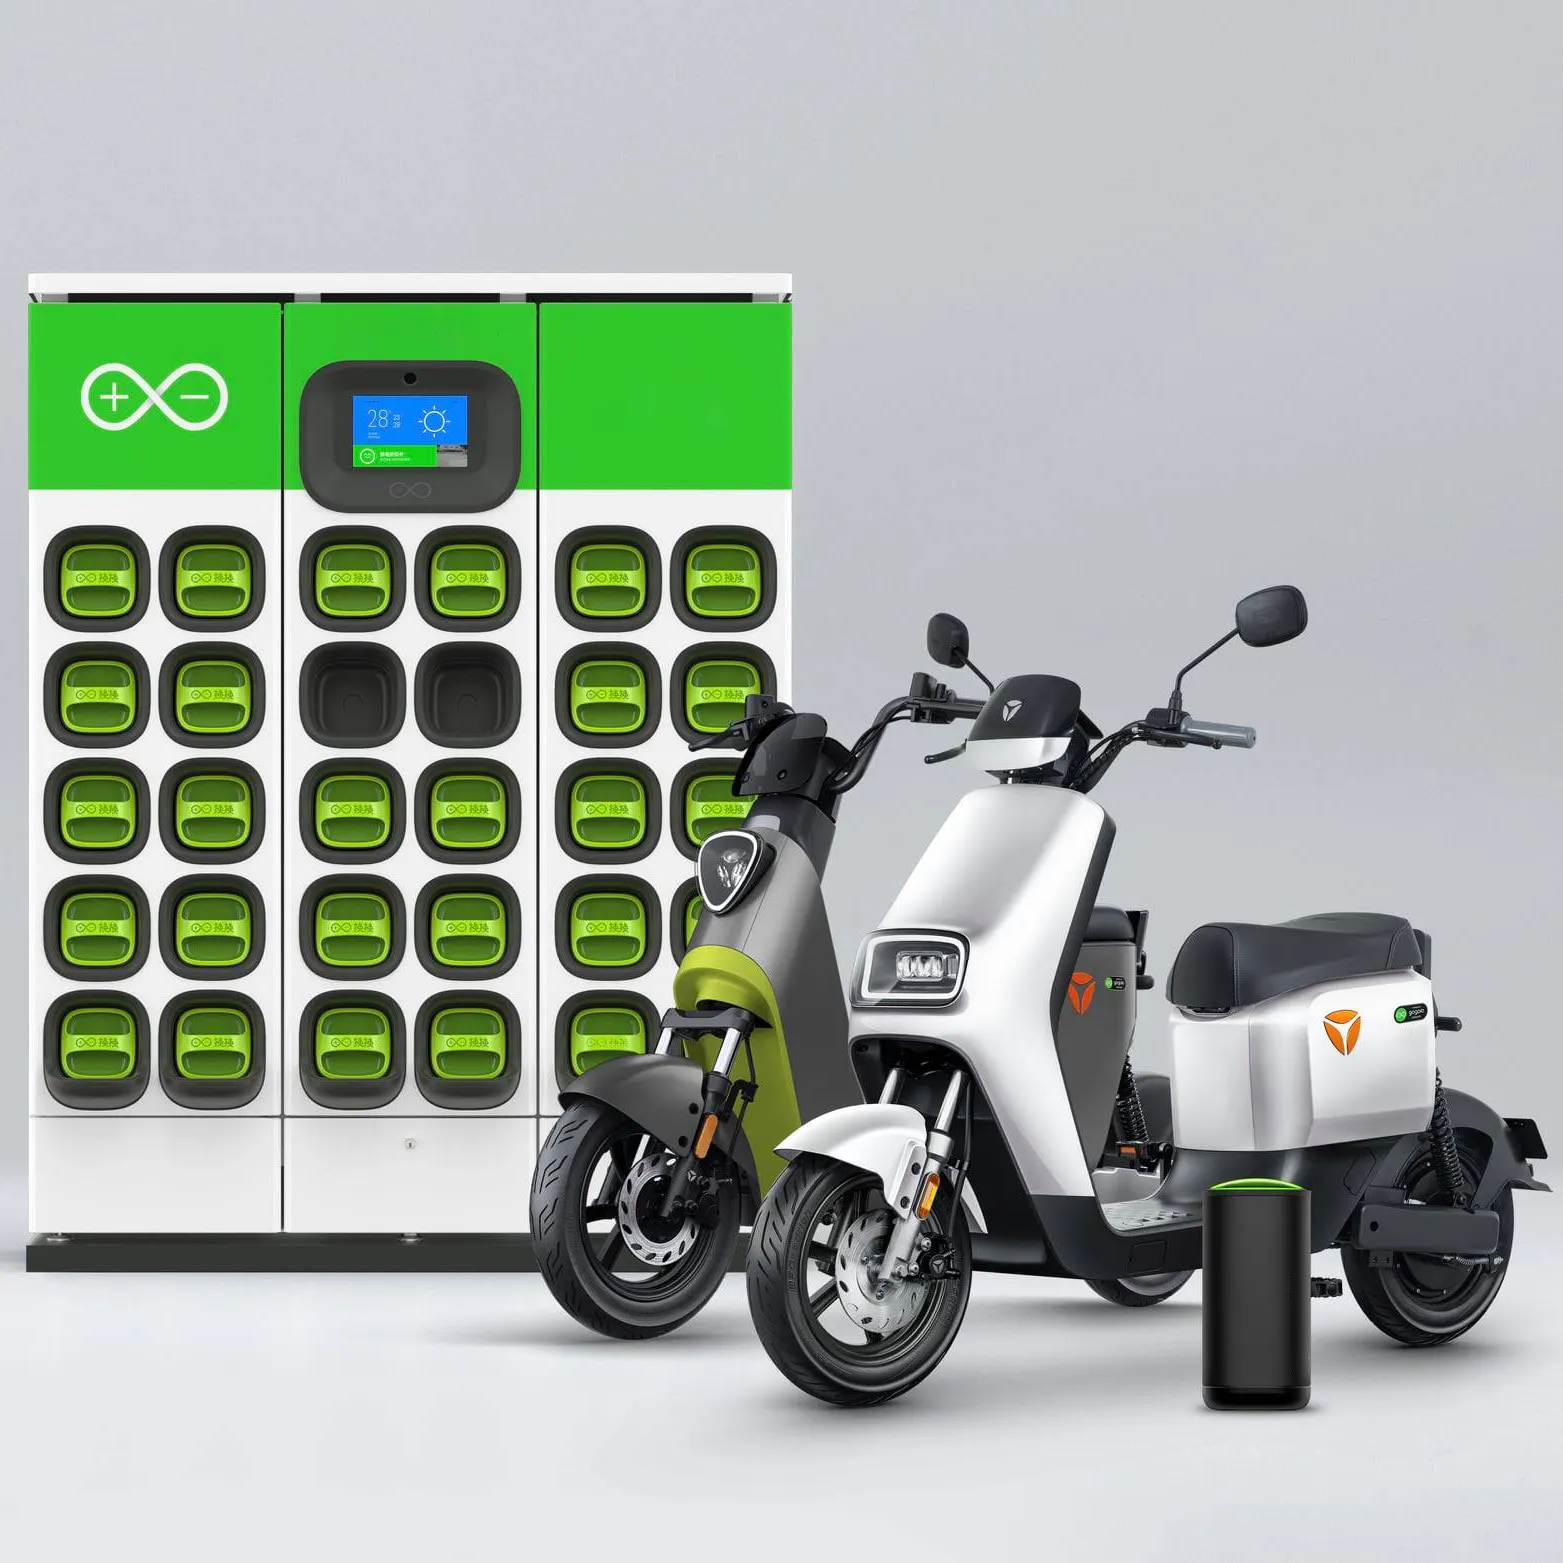 Hs Public Charging Cabinet Battery Swap Module Motorcycle E-bike Scooter Solar Battery Swapping Charging Station